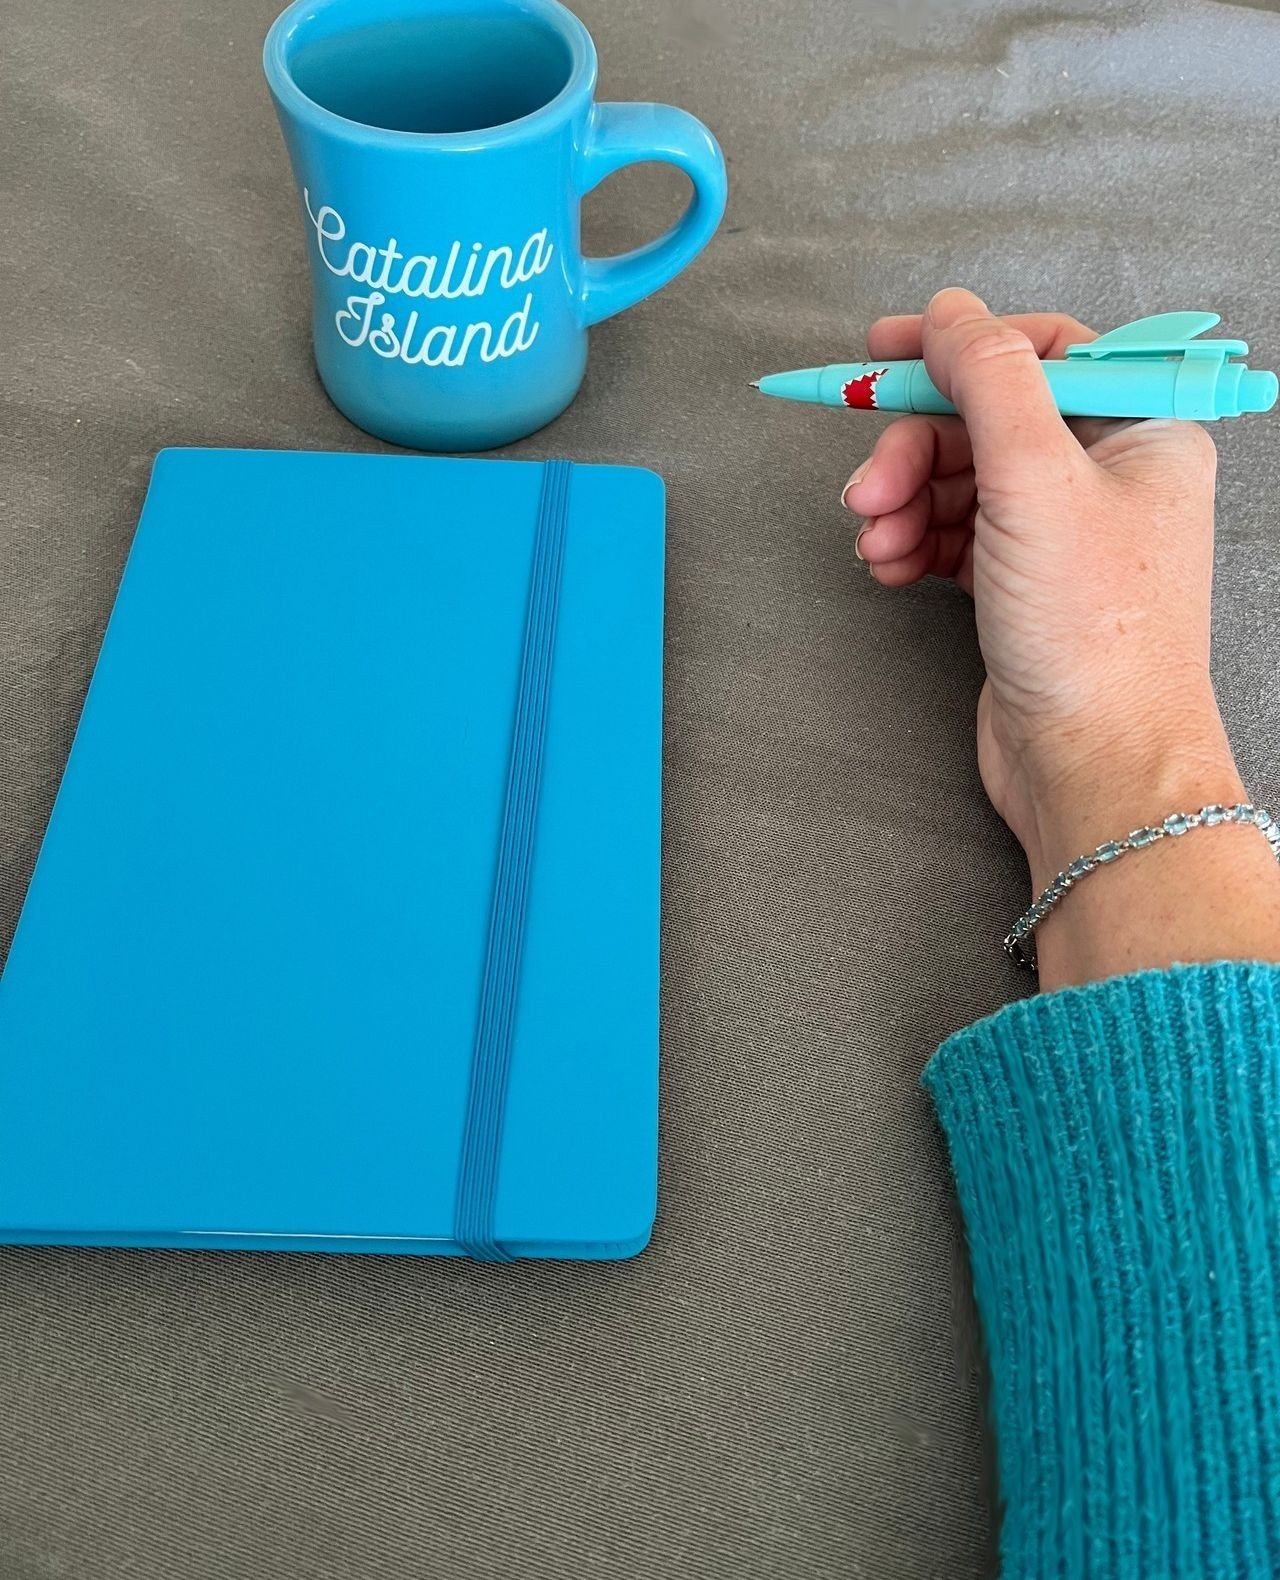 I think I'm obsessed with blue - what do you think?⁠
⁠
Just got myself a new notebook to journal and to jot down fun new words for future art pieces. ⁠
⁠
I'm thankful for my friends that forced us to stop and have a few days at the beach - of course 